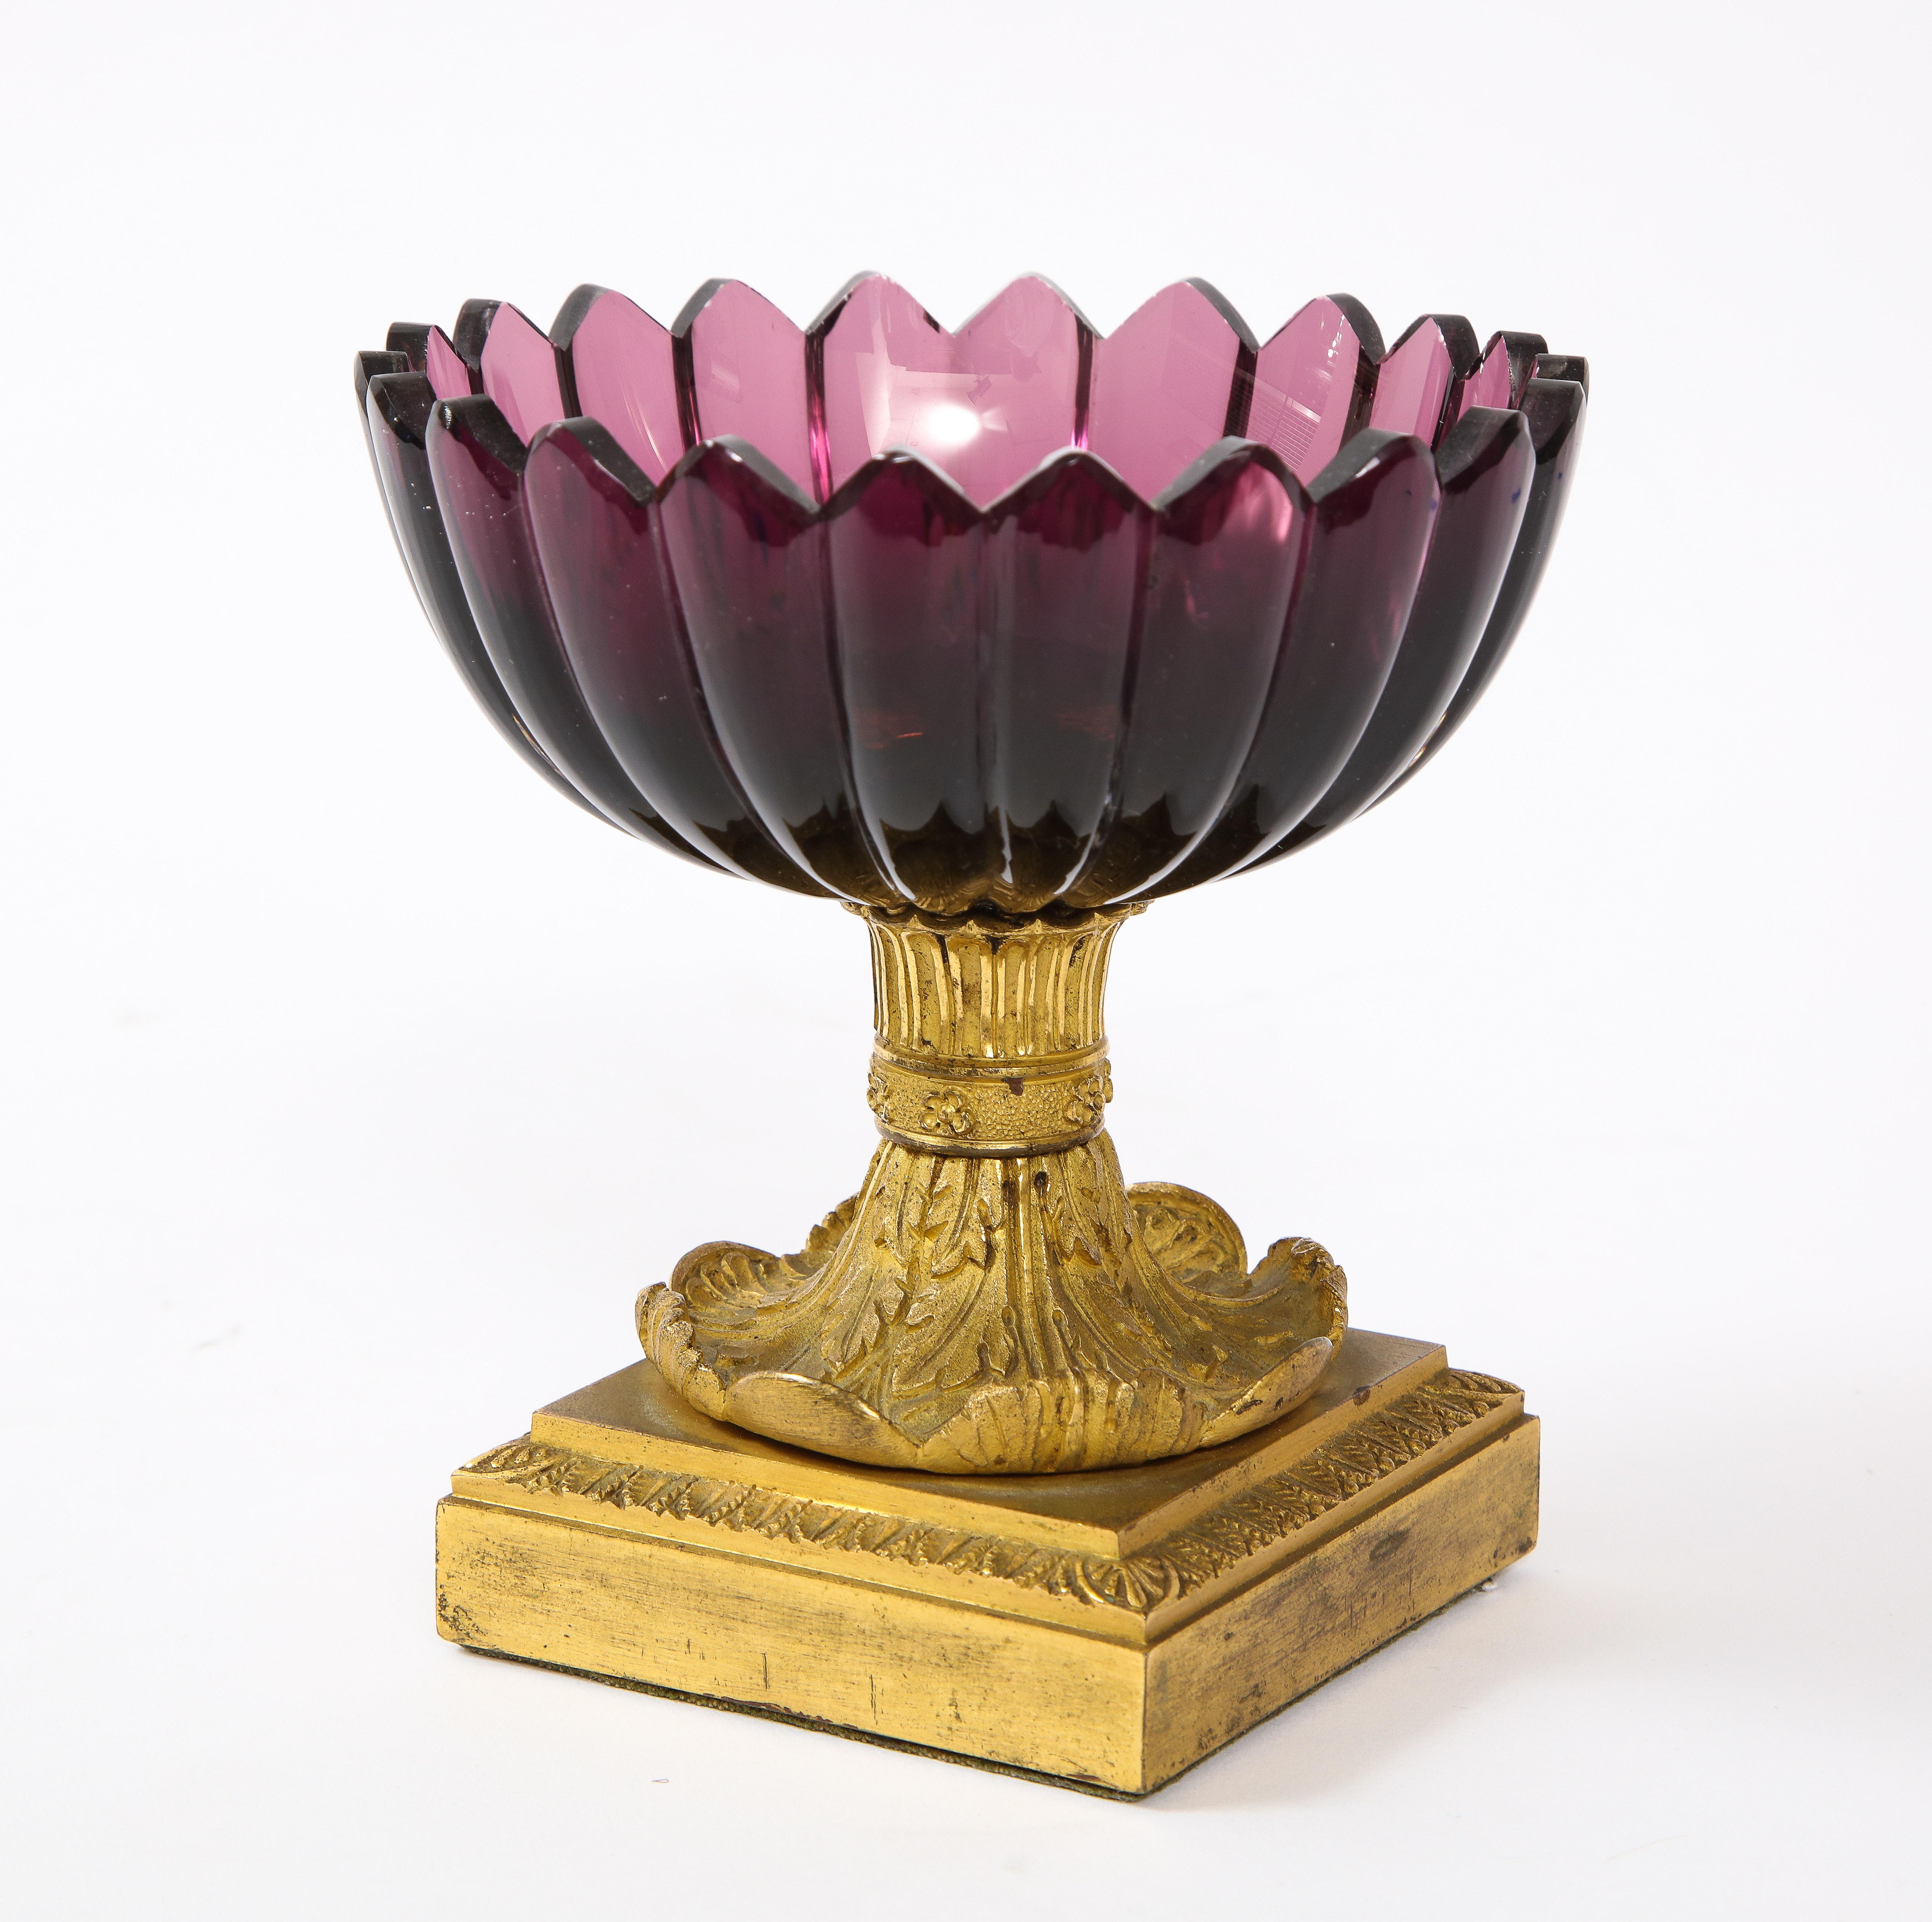 A fantastic quality 19th century Russian Empire period Dore bronze mounted amethyst crystal scalloped rim tazza/cache-pot. The crystal is of a beautiful rich amethyst purple color. The crystal is beautifully hand-cut and shaped with a scalloped rim.